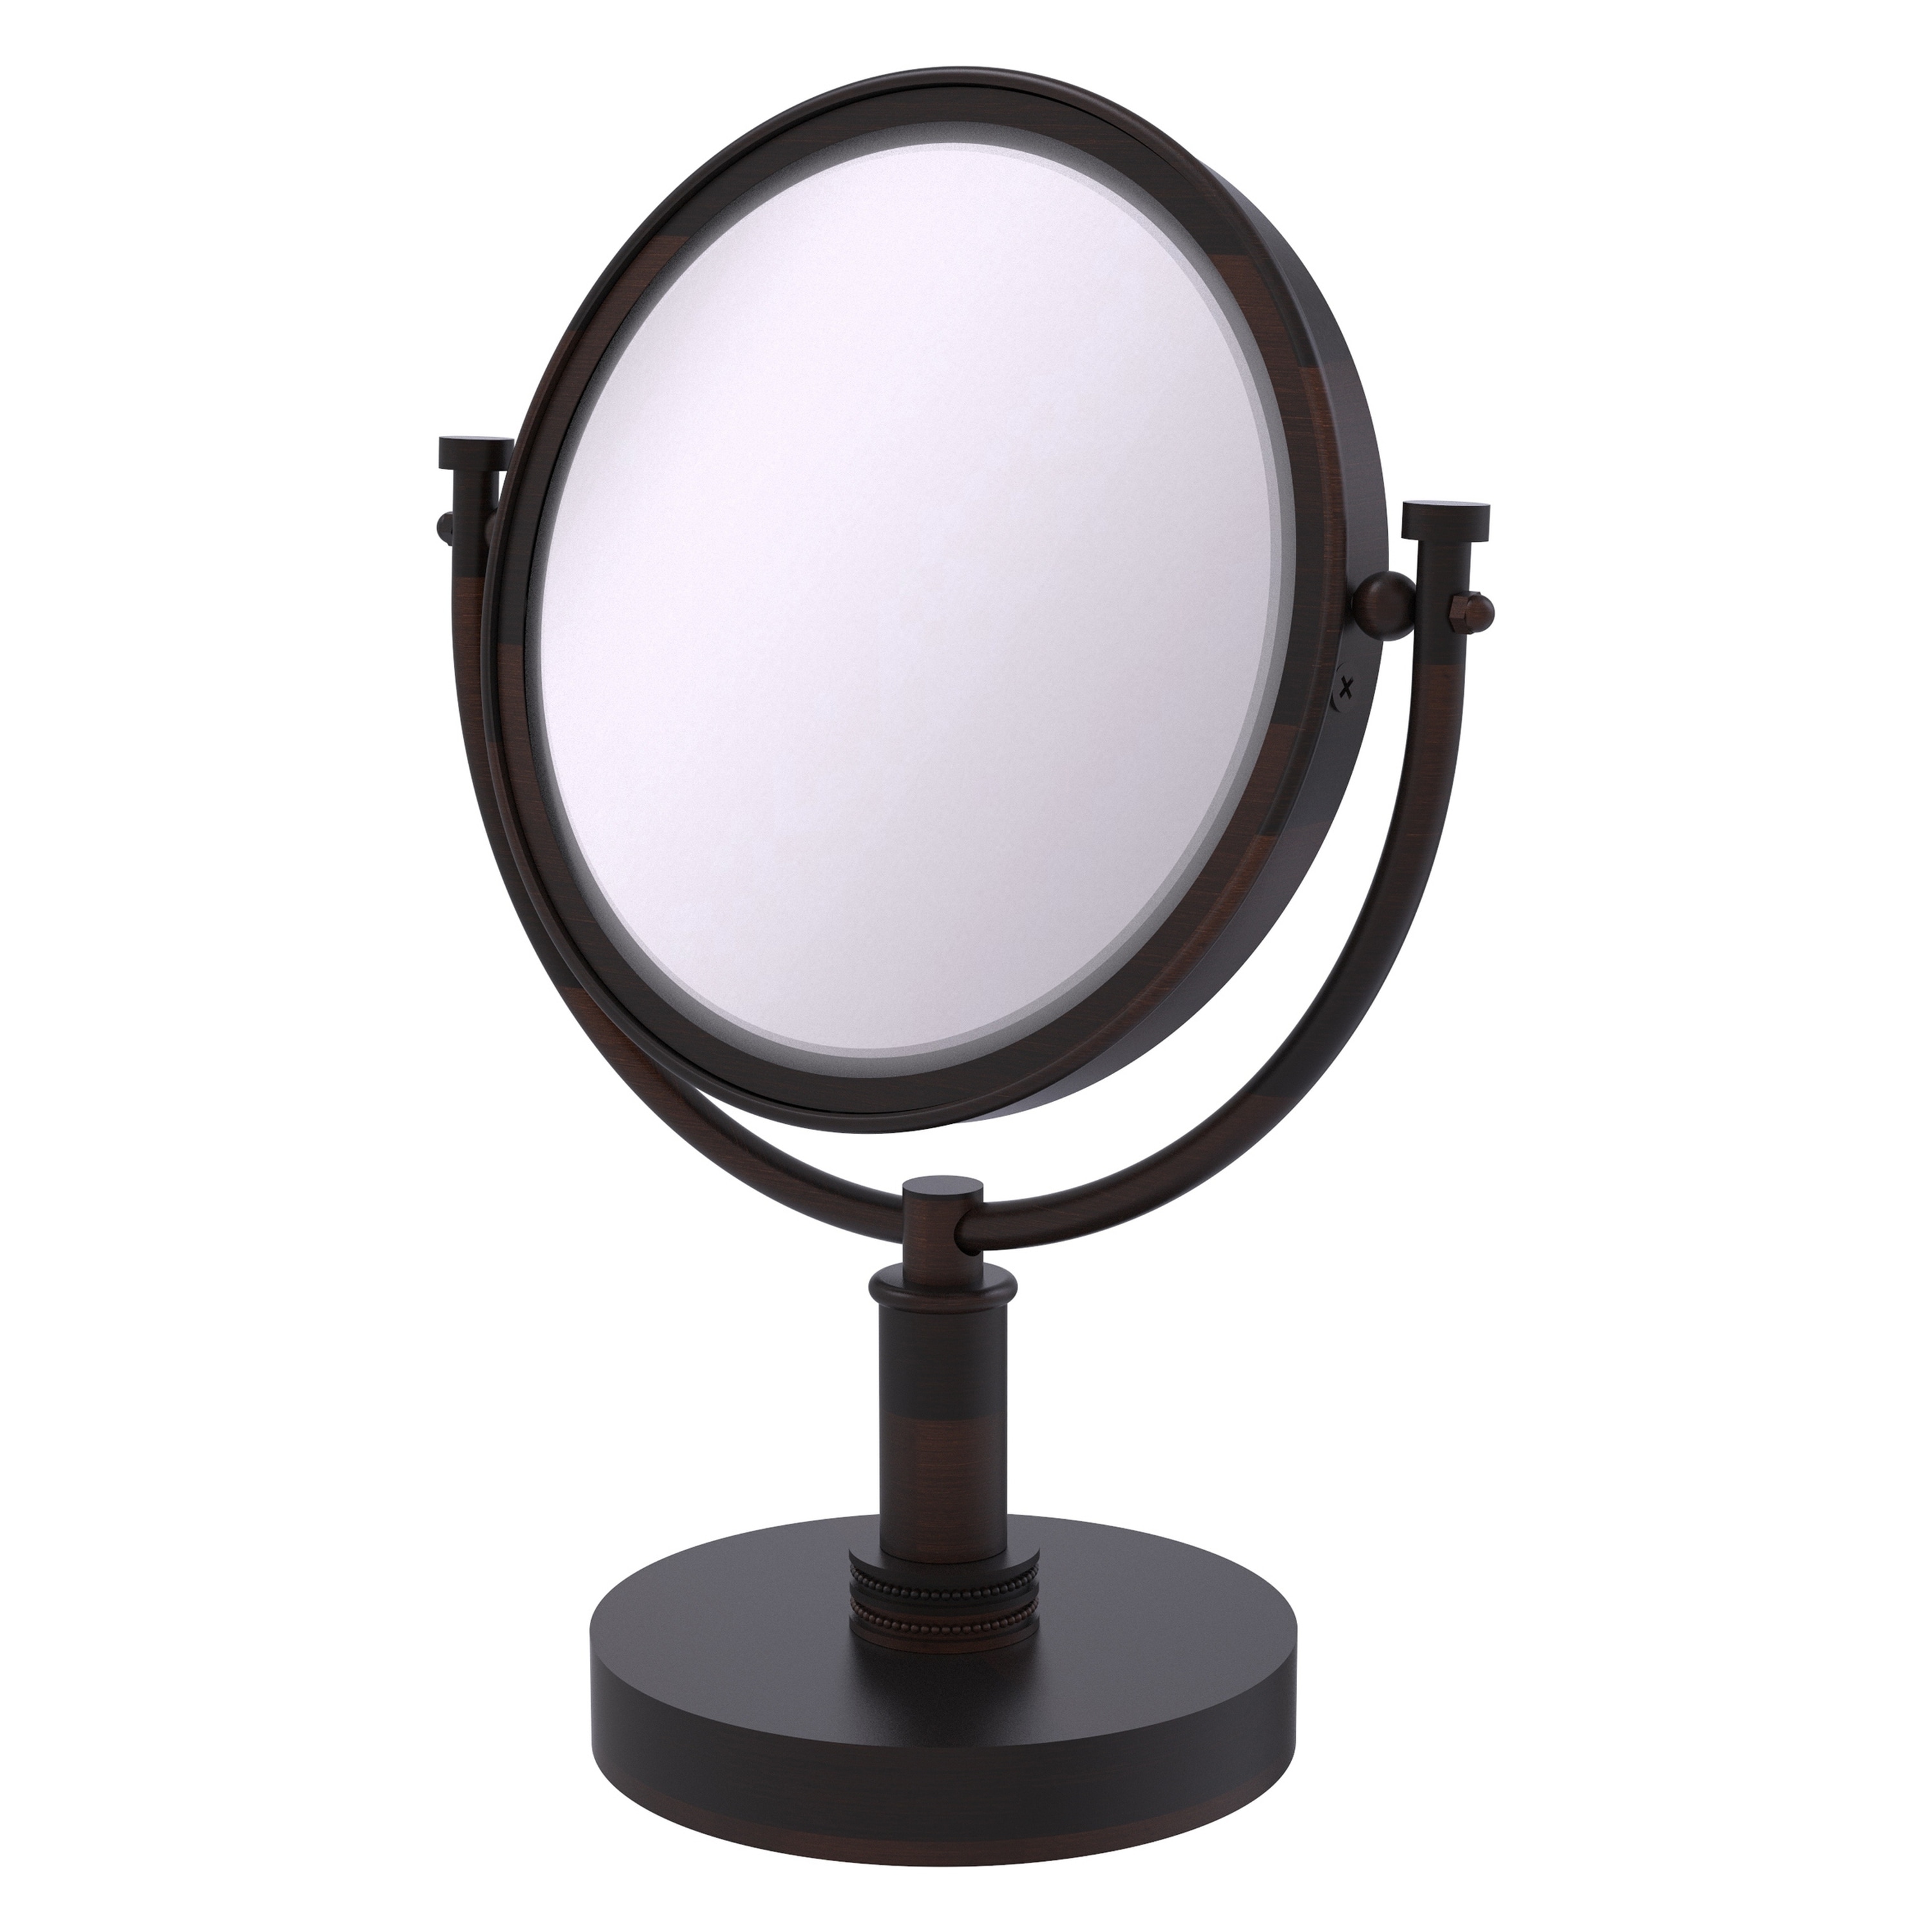 8-in x 15-in Distressed White Double-sided 5X Magnifying Countertop Vanity Mirror | - Allied Brass DM-4D/4X-VB